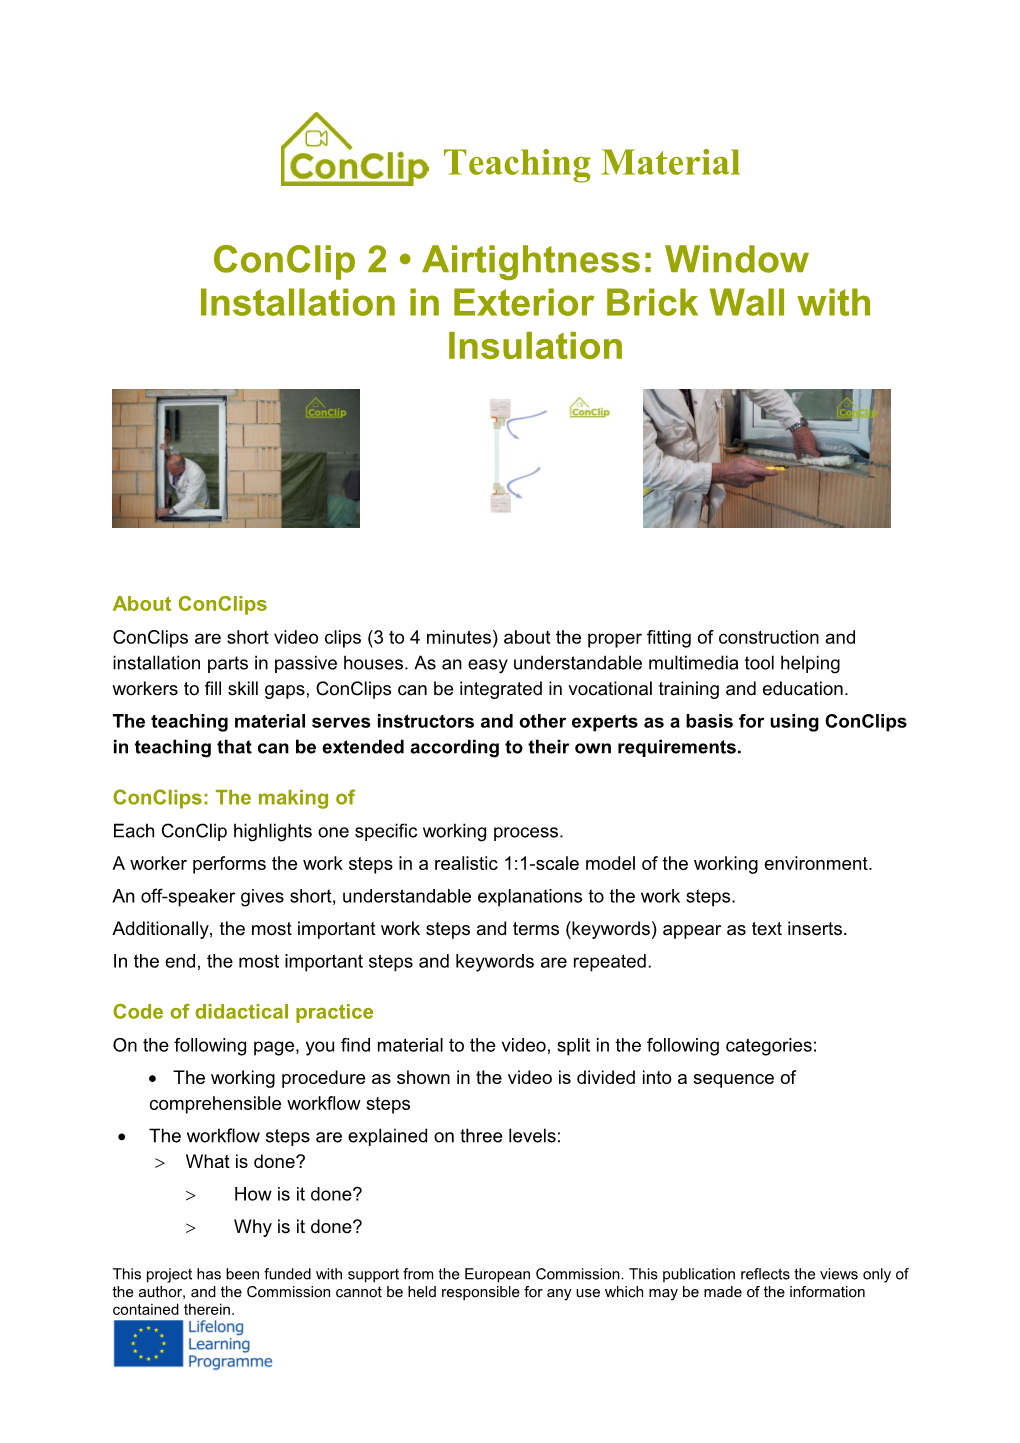 Conclip2 Airtightness:Window Installation in Exterior Brick Wall with Insulation